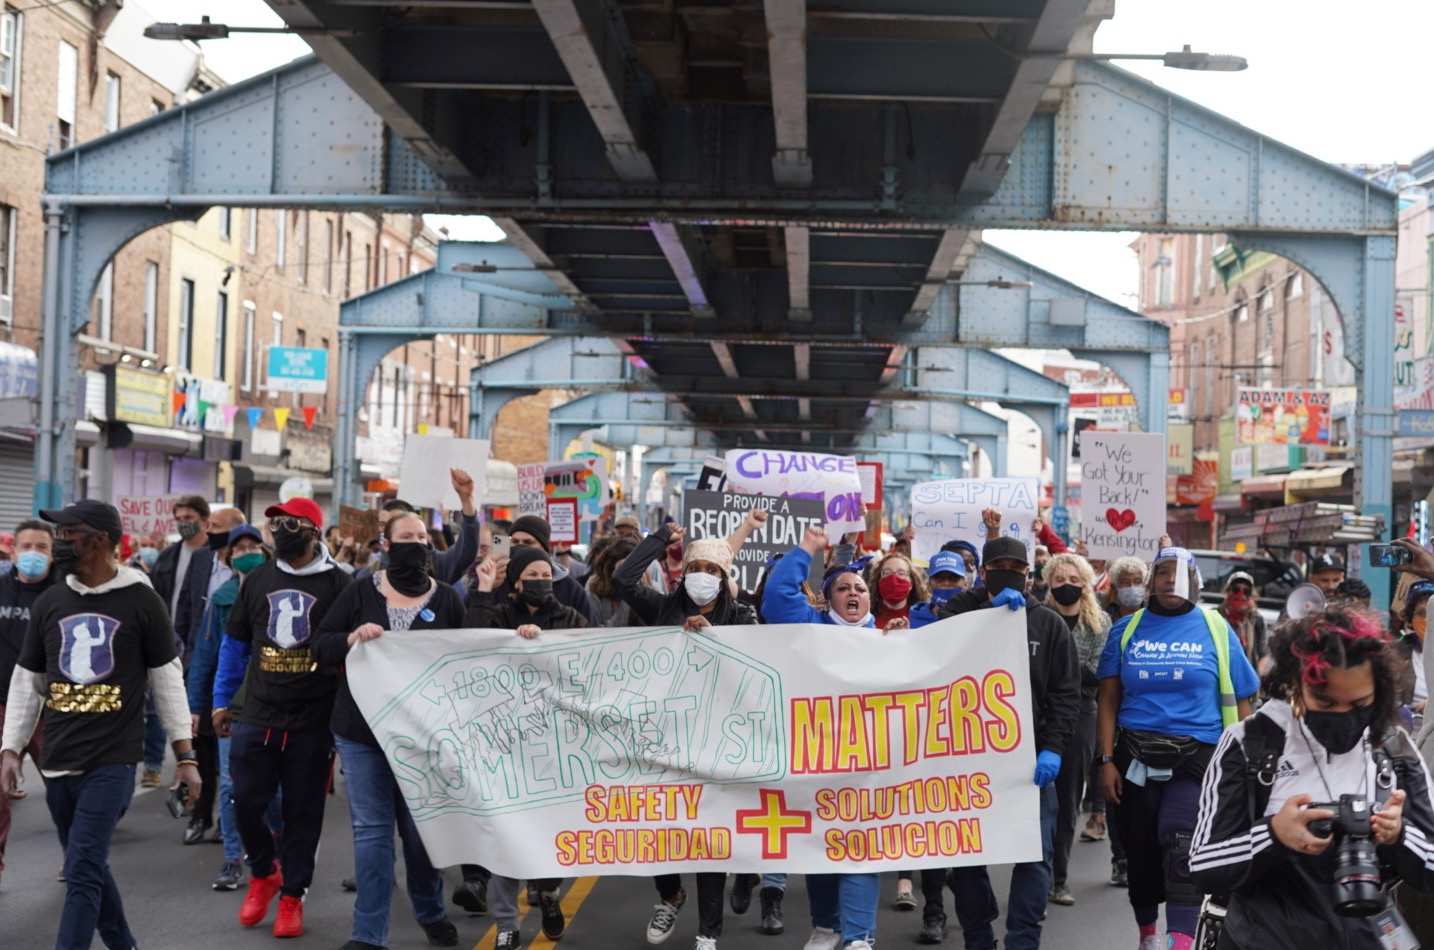 Organizers in Kensington march in support of public safety solutions.